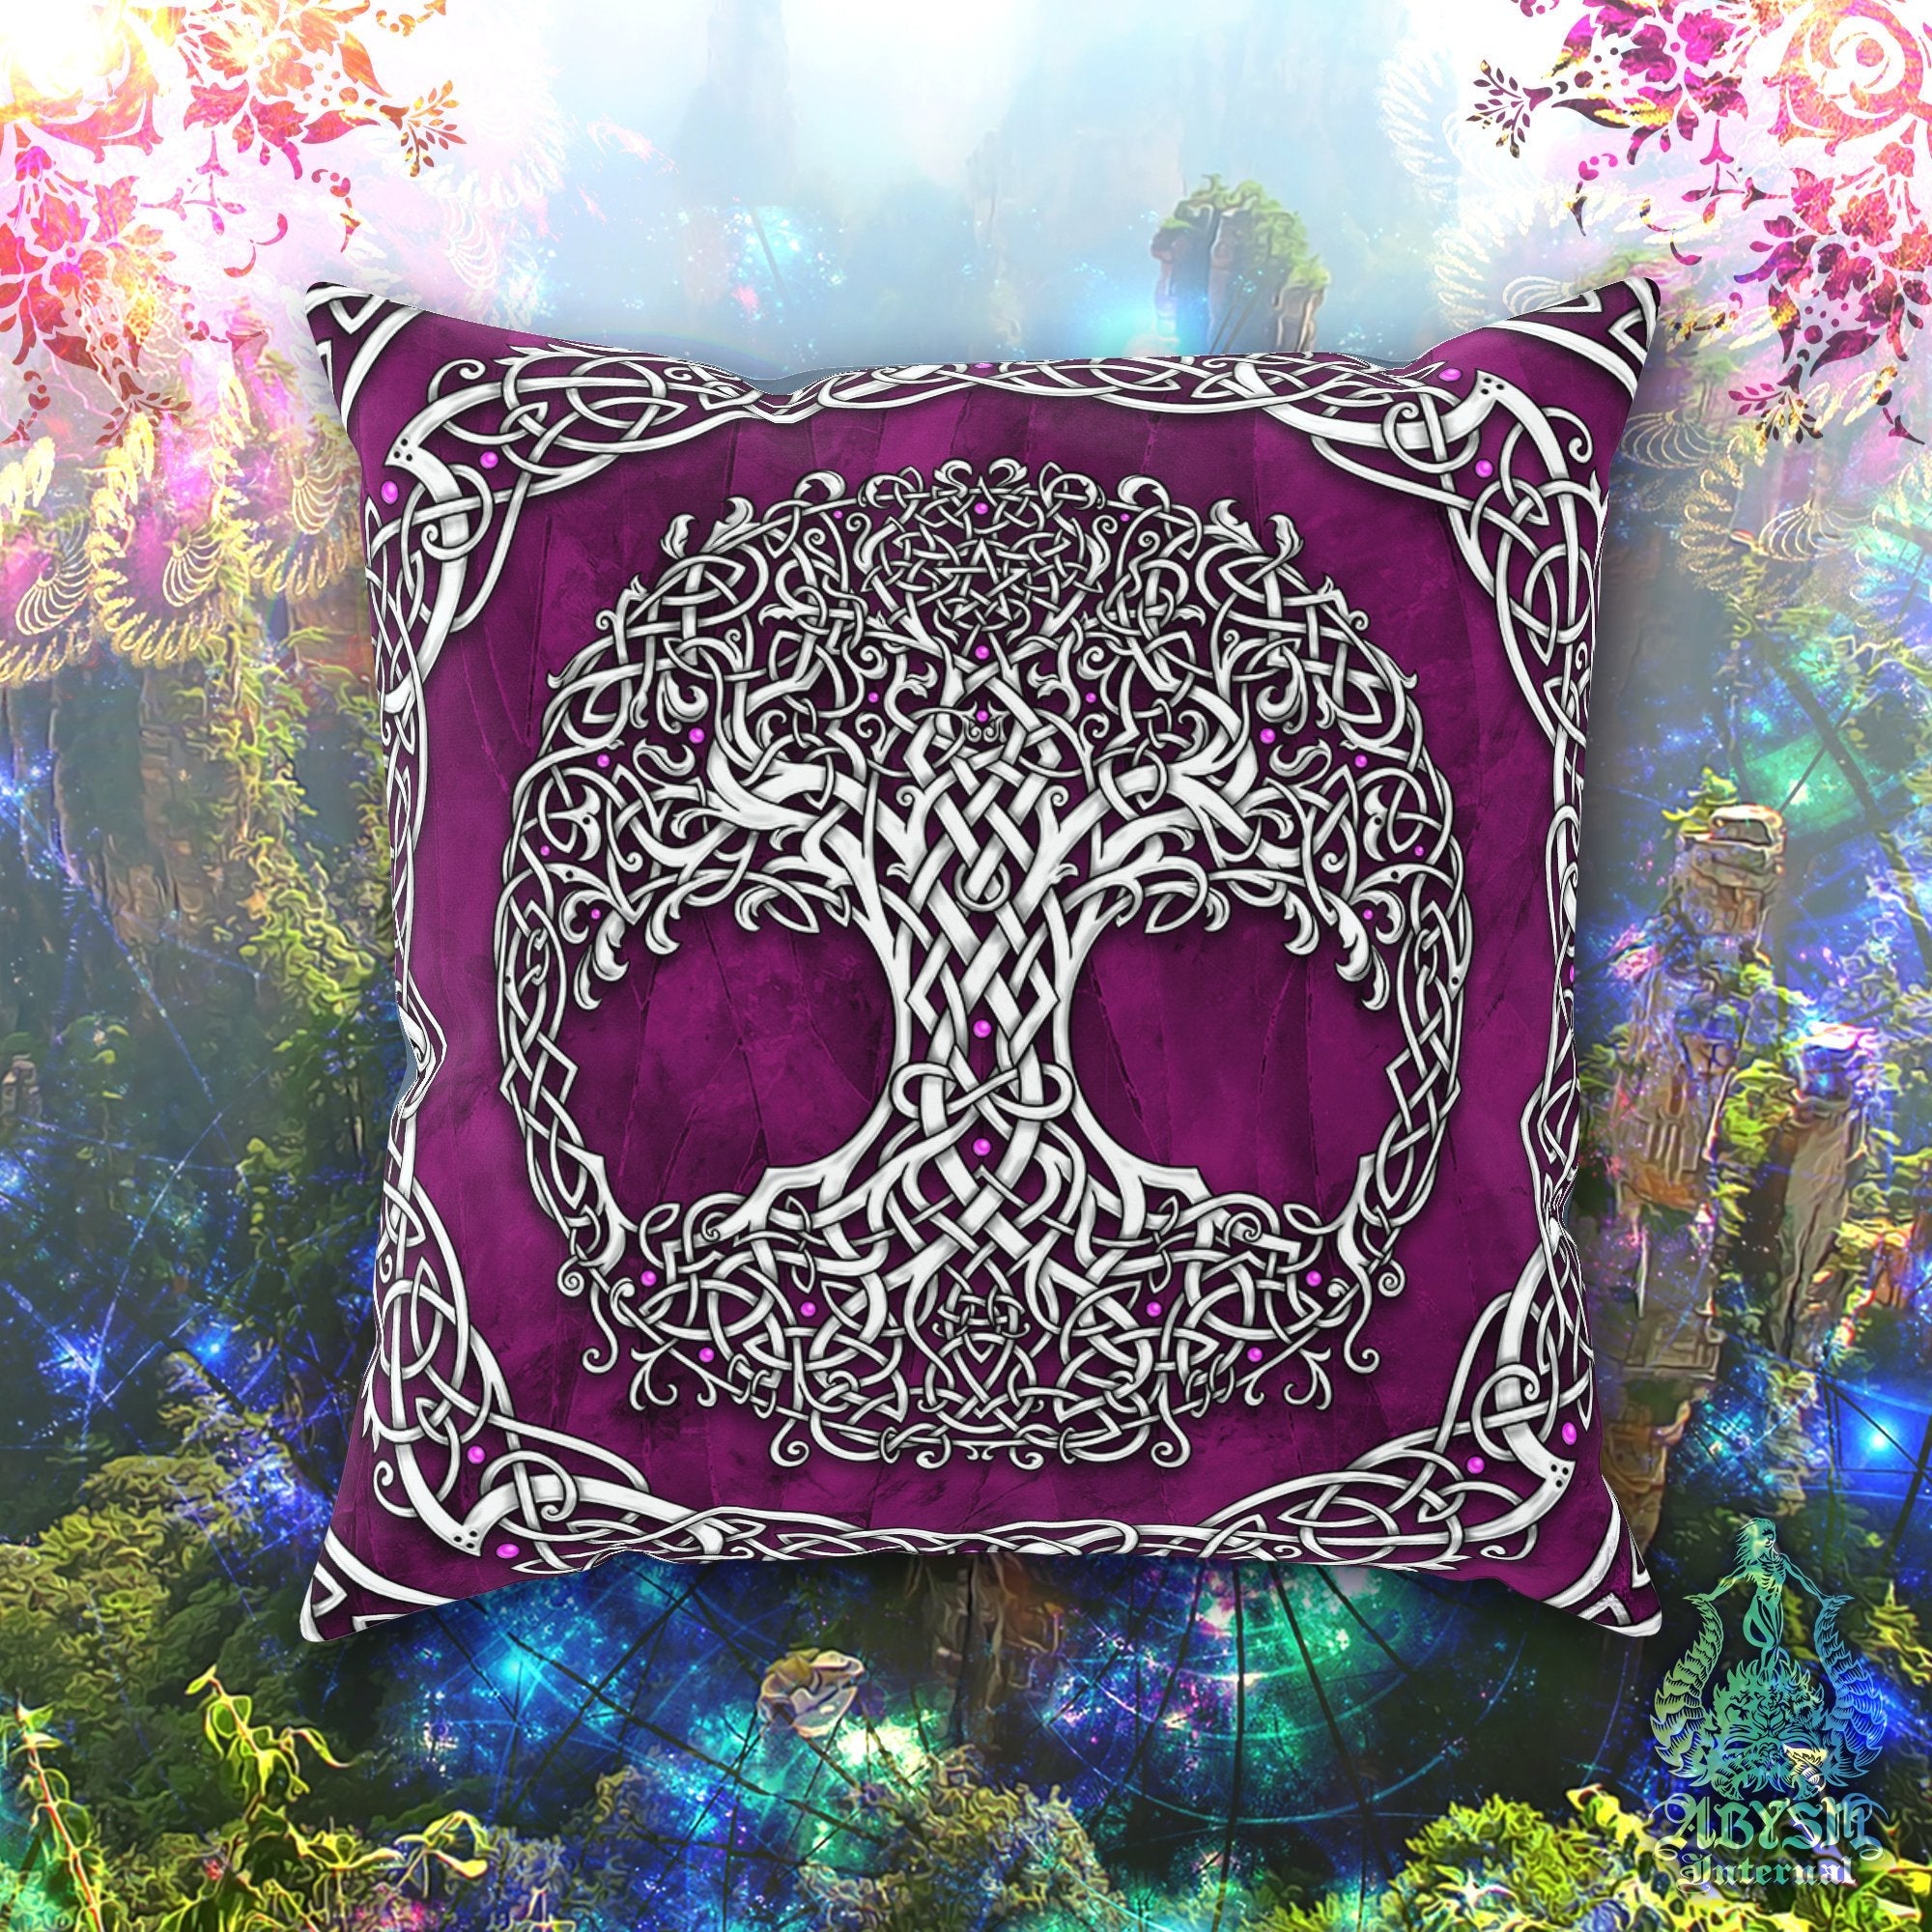 Witch Throw Pillow, Decorative Accent Cushion, Tree of Life, Wicca Room Decor, Witchy Art, Celtic Knot, Funky and Eclectic Home - White & Purple - Abysm Internal